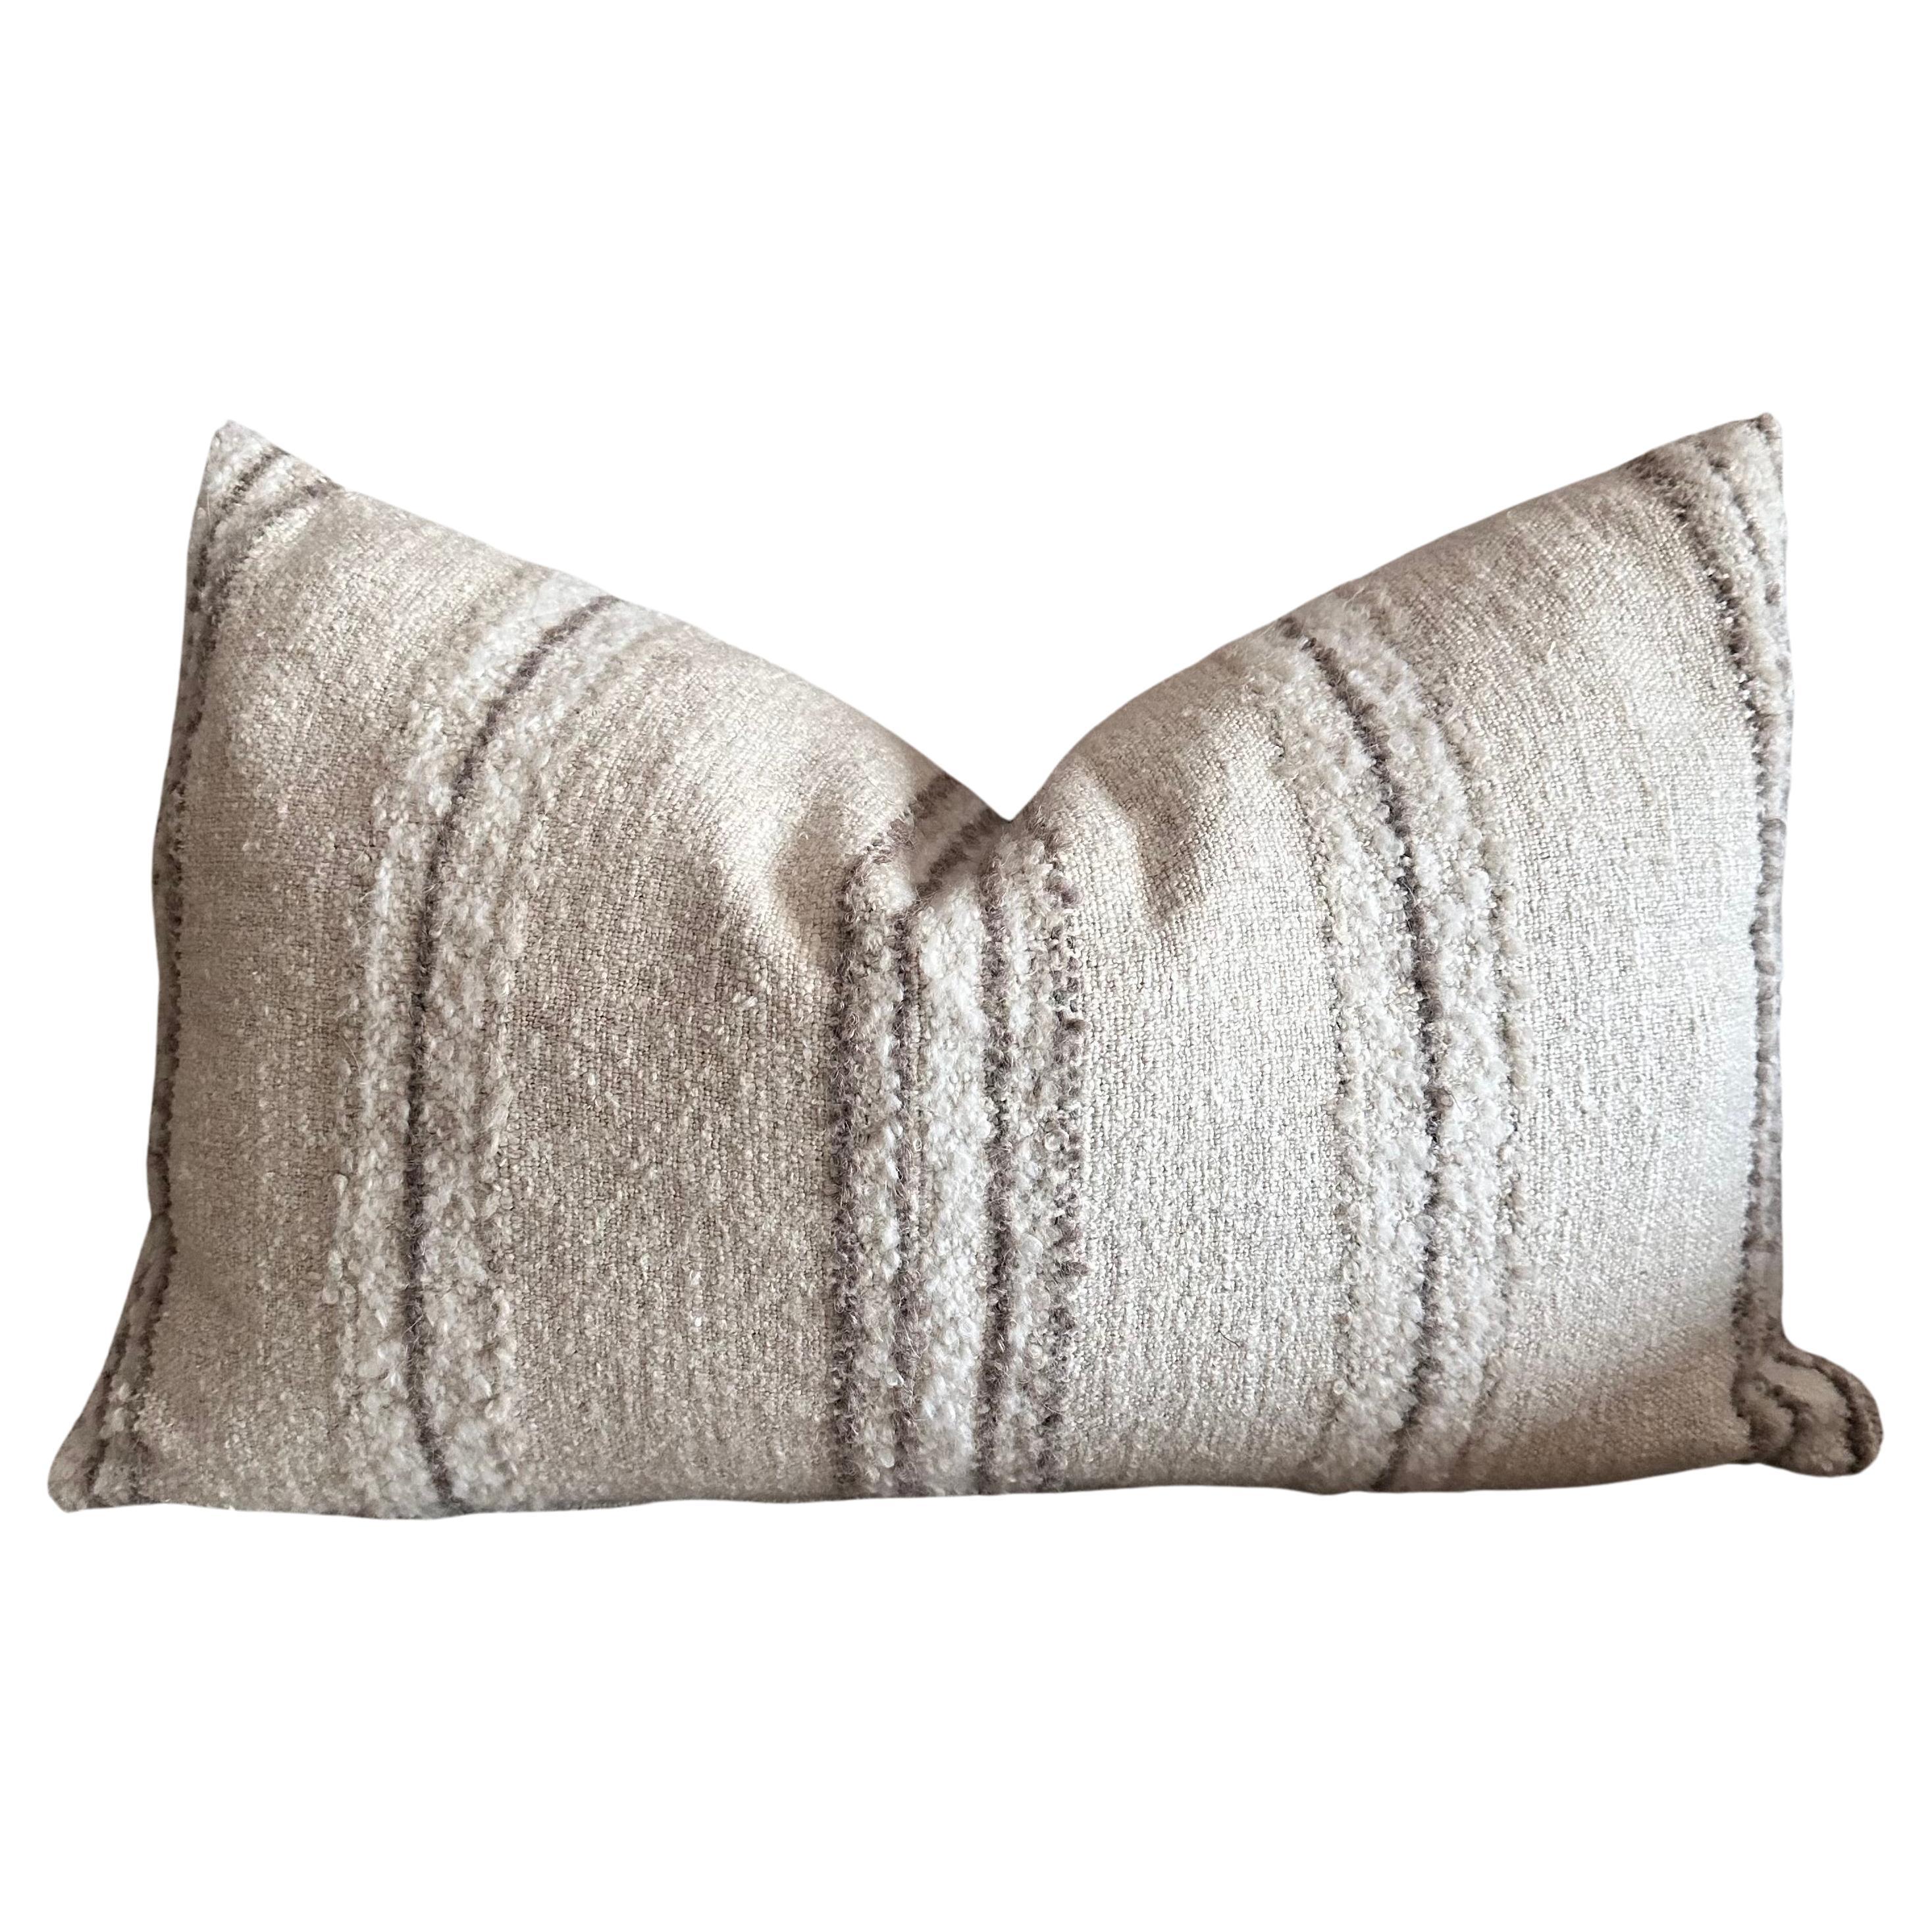 Becker Woven Linen and Wool Lumbar Stripe Pillow with Down Feather Insert For Sale